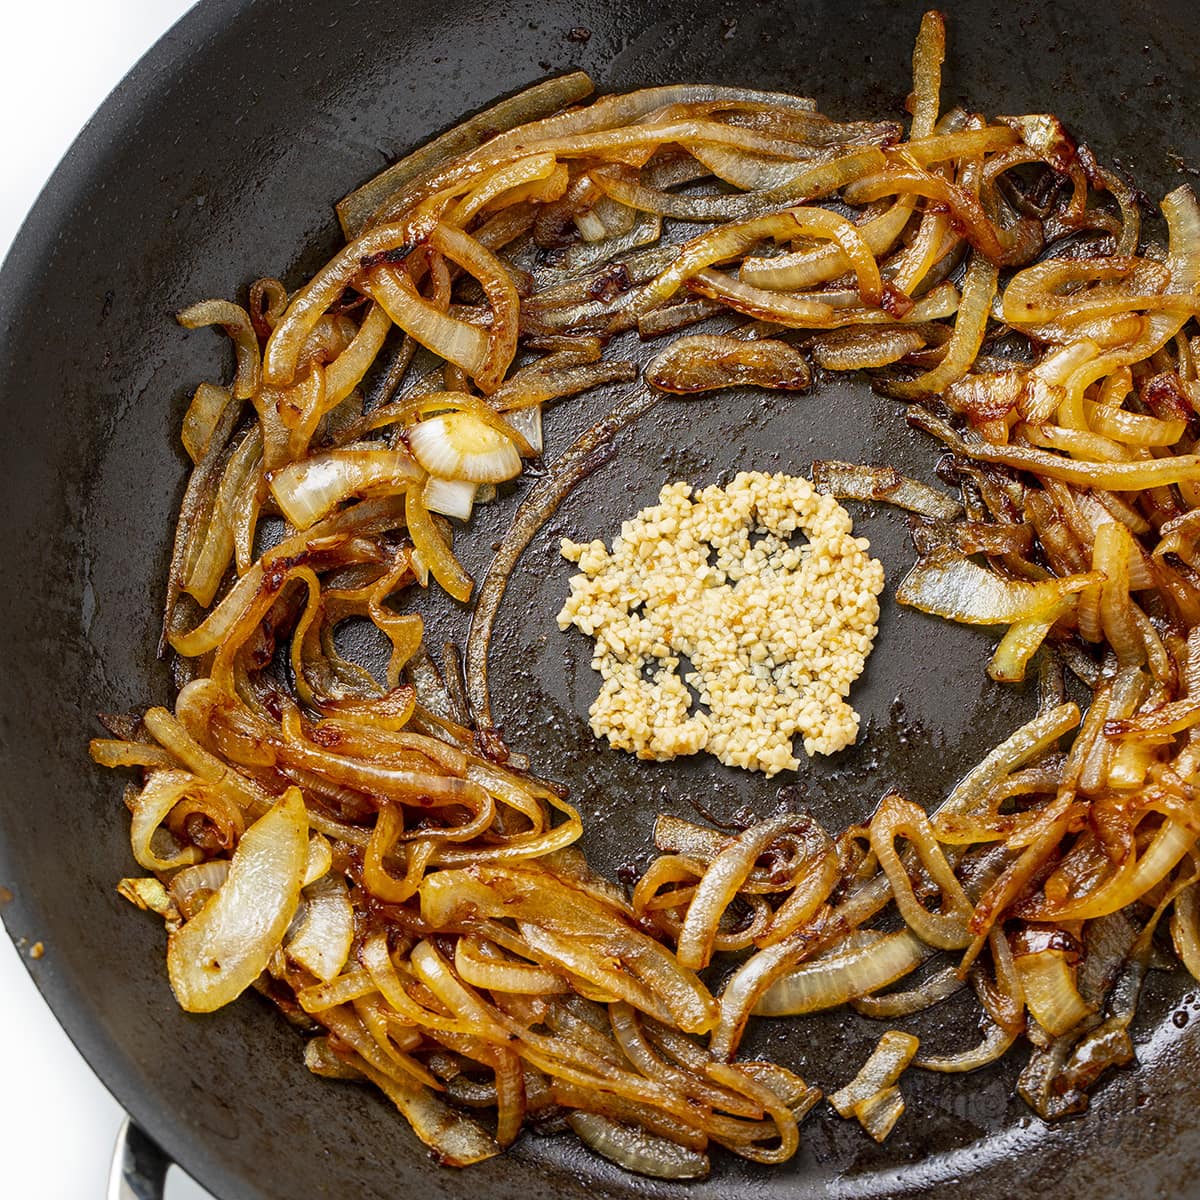 Fried onions and garlic in a skillet.